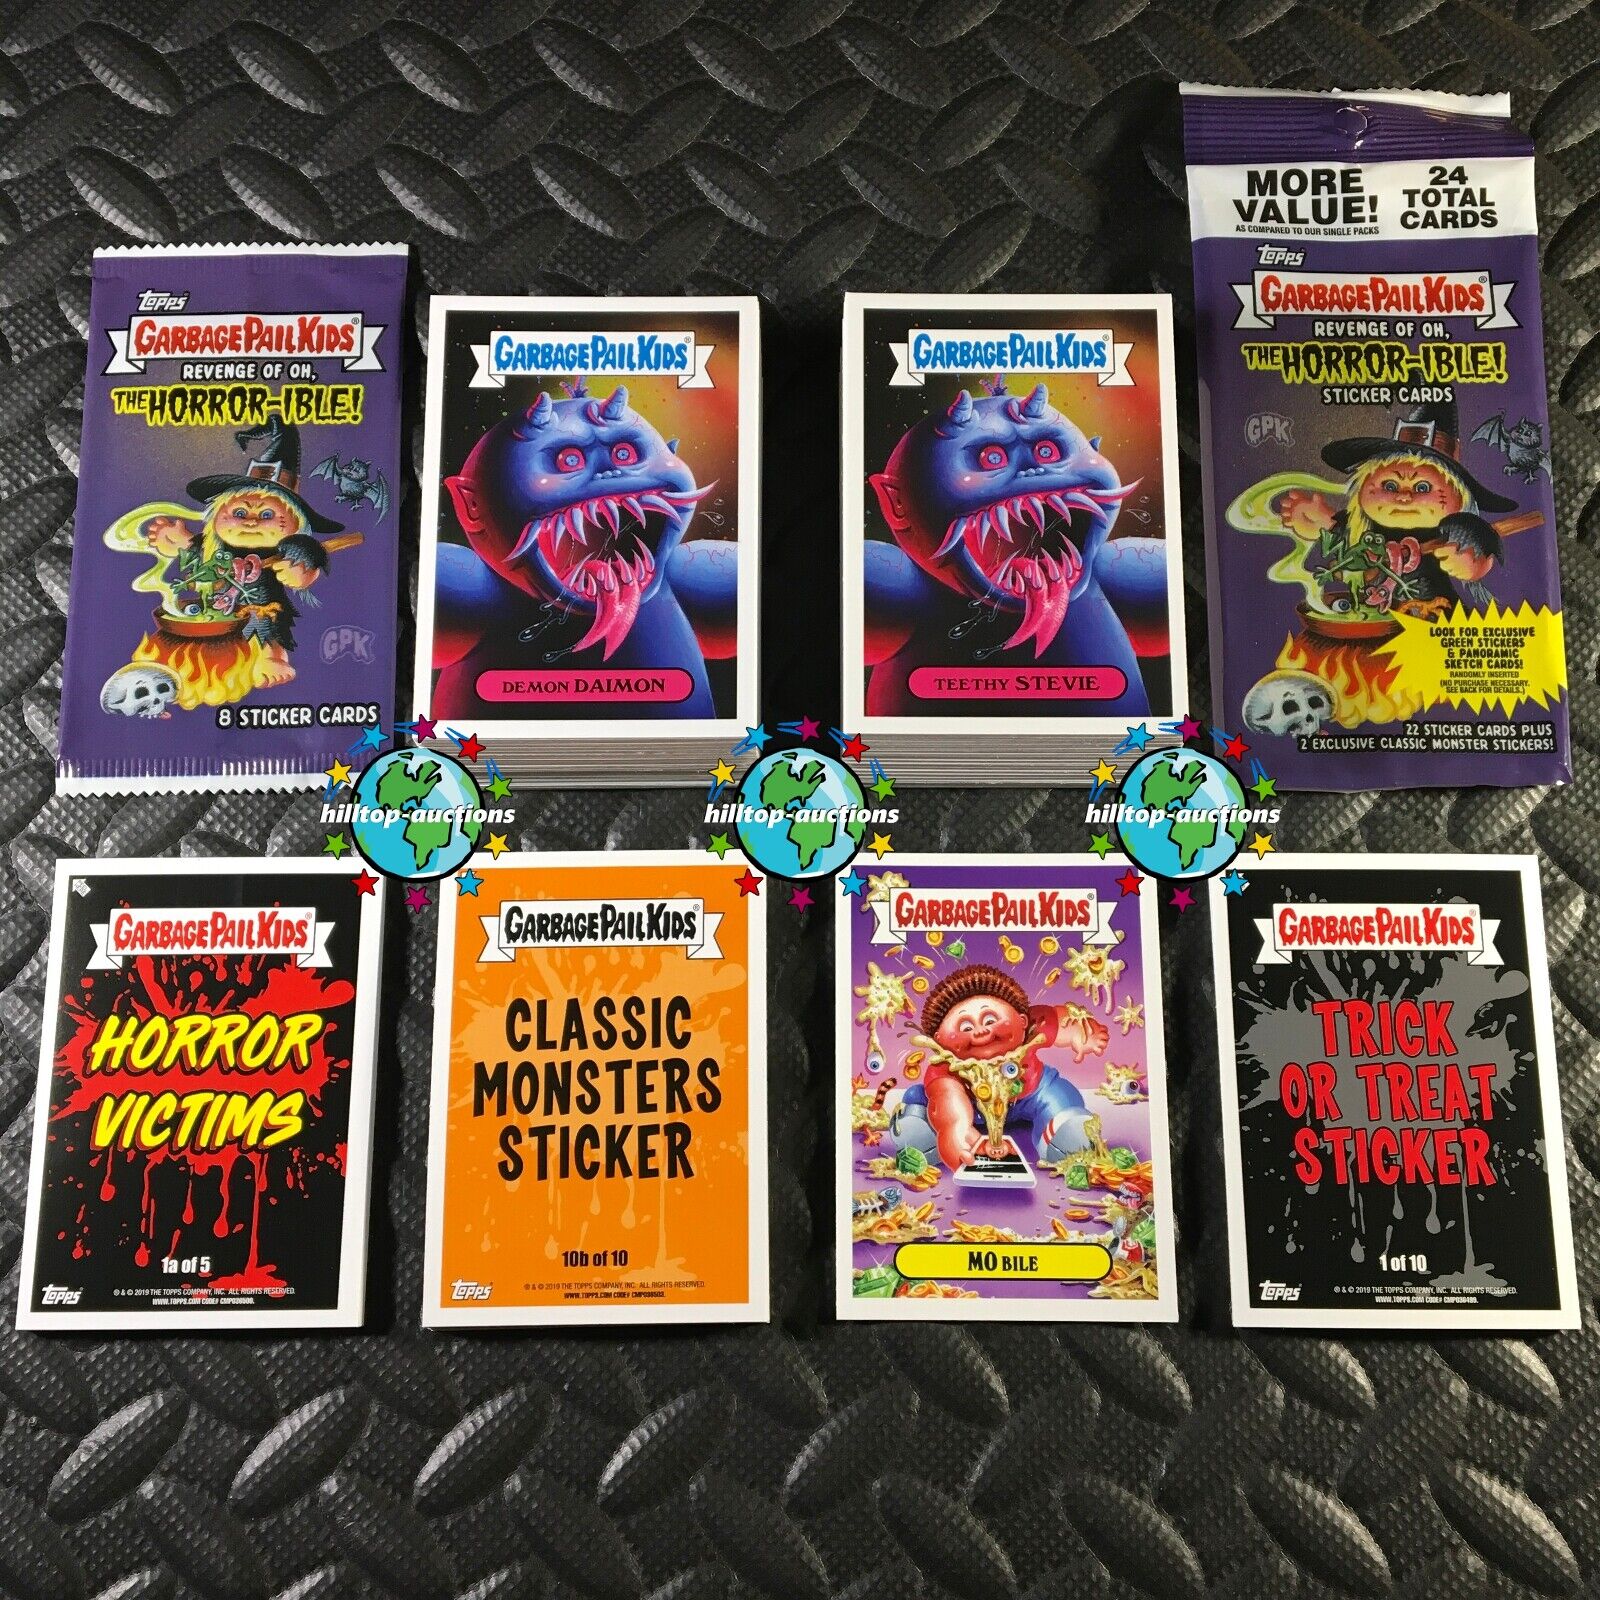 GARBAGE PAIL KIDS REVENGE OF OH THE HORROR-IBLE 241-CARD MASTER SET +3X WRAPPERS